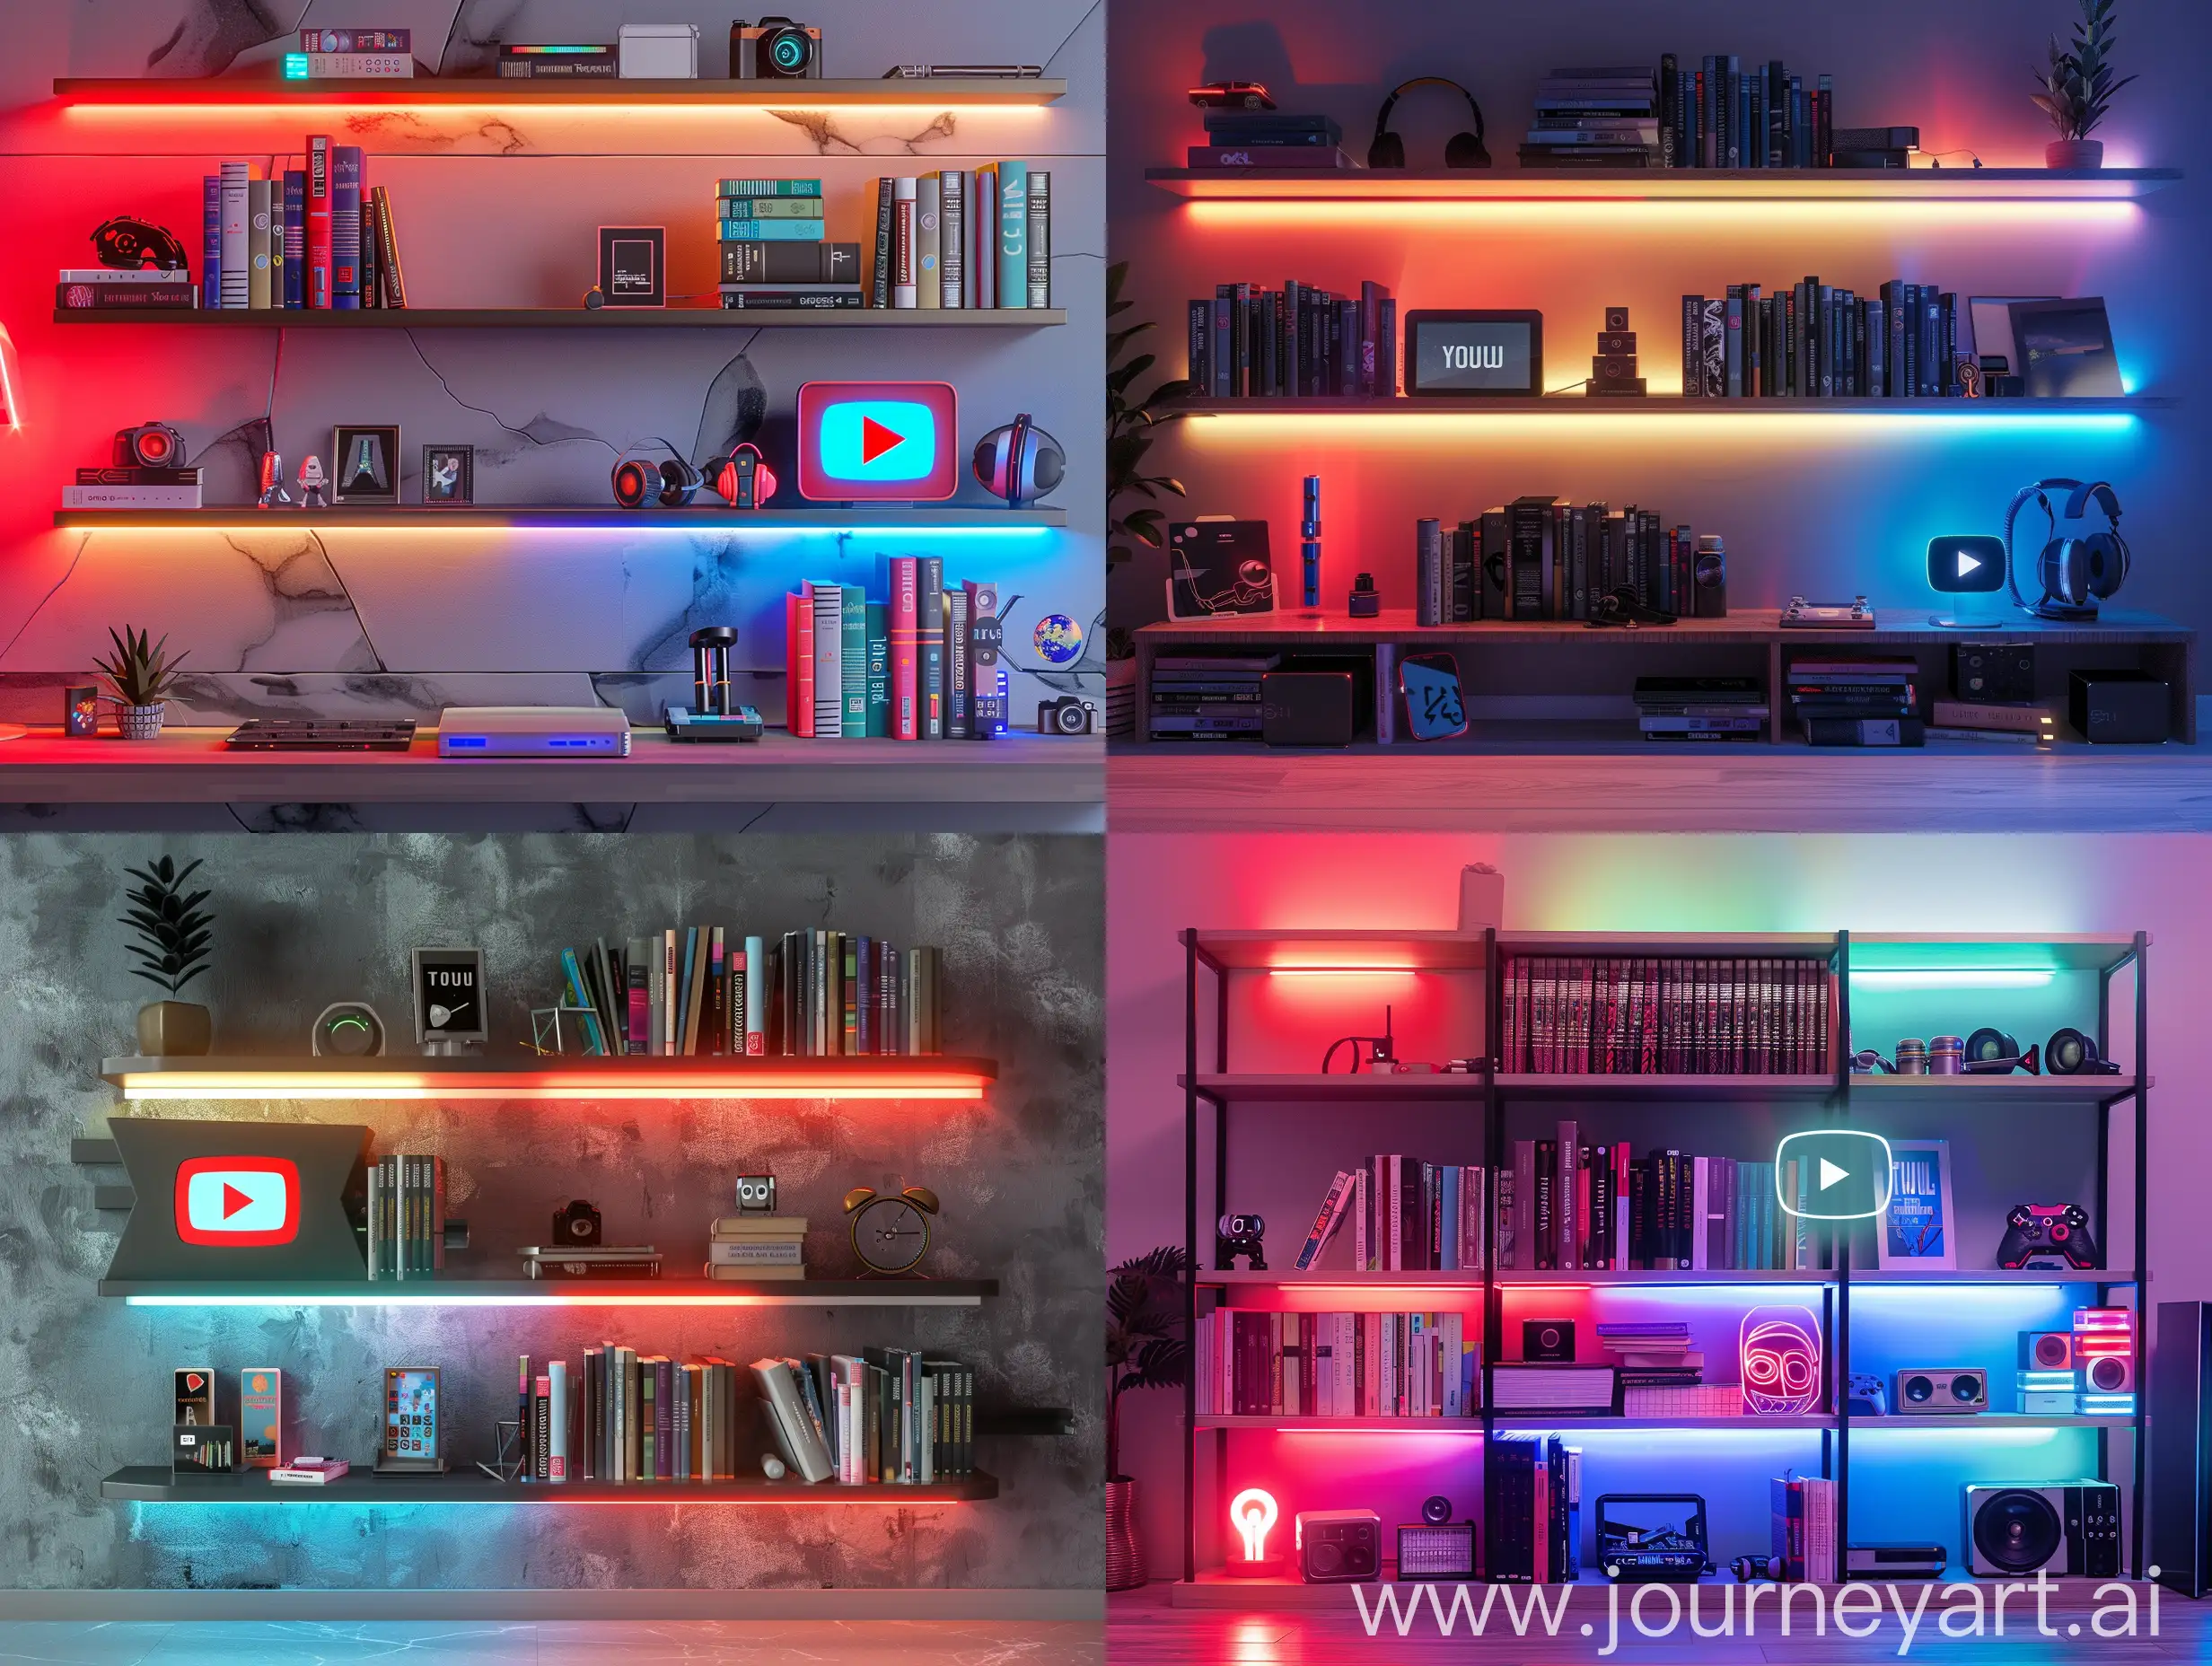 TechInfused-YouTube-Video-Wall-with-RGB-Lighting-and-Play-Button-Bookshelf